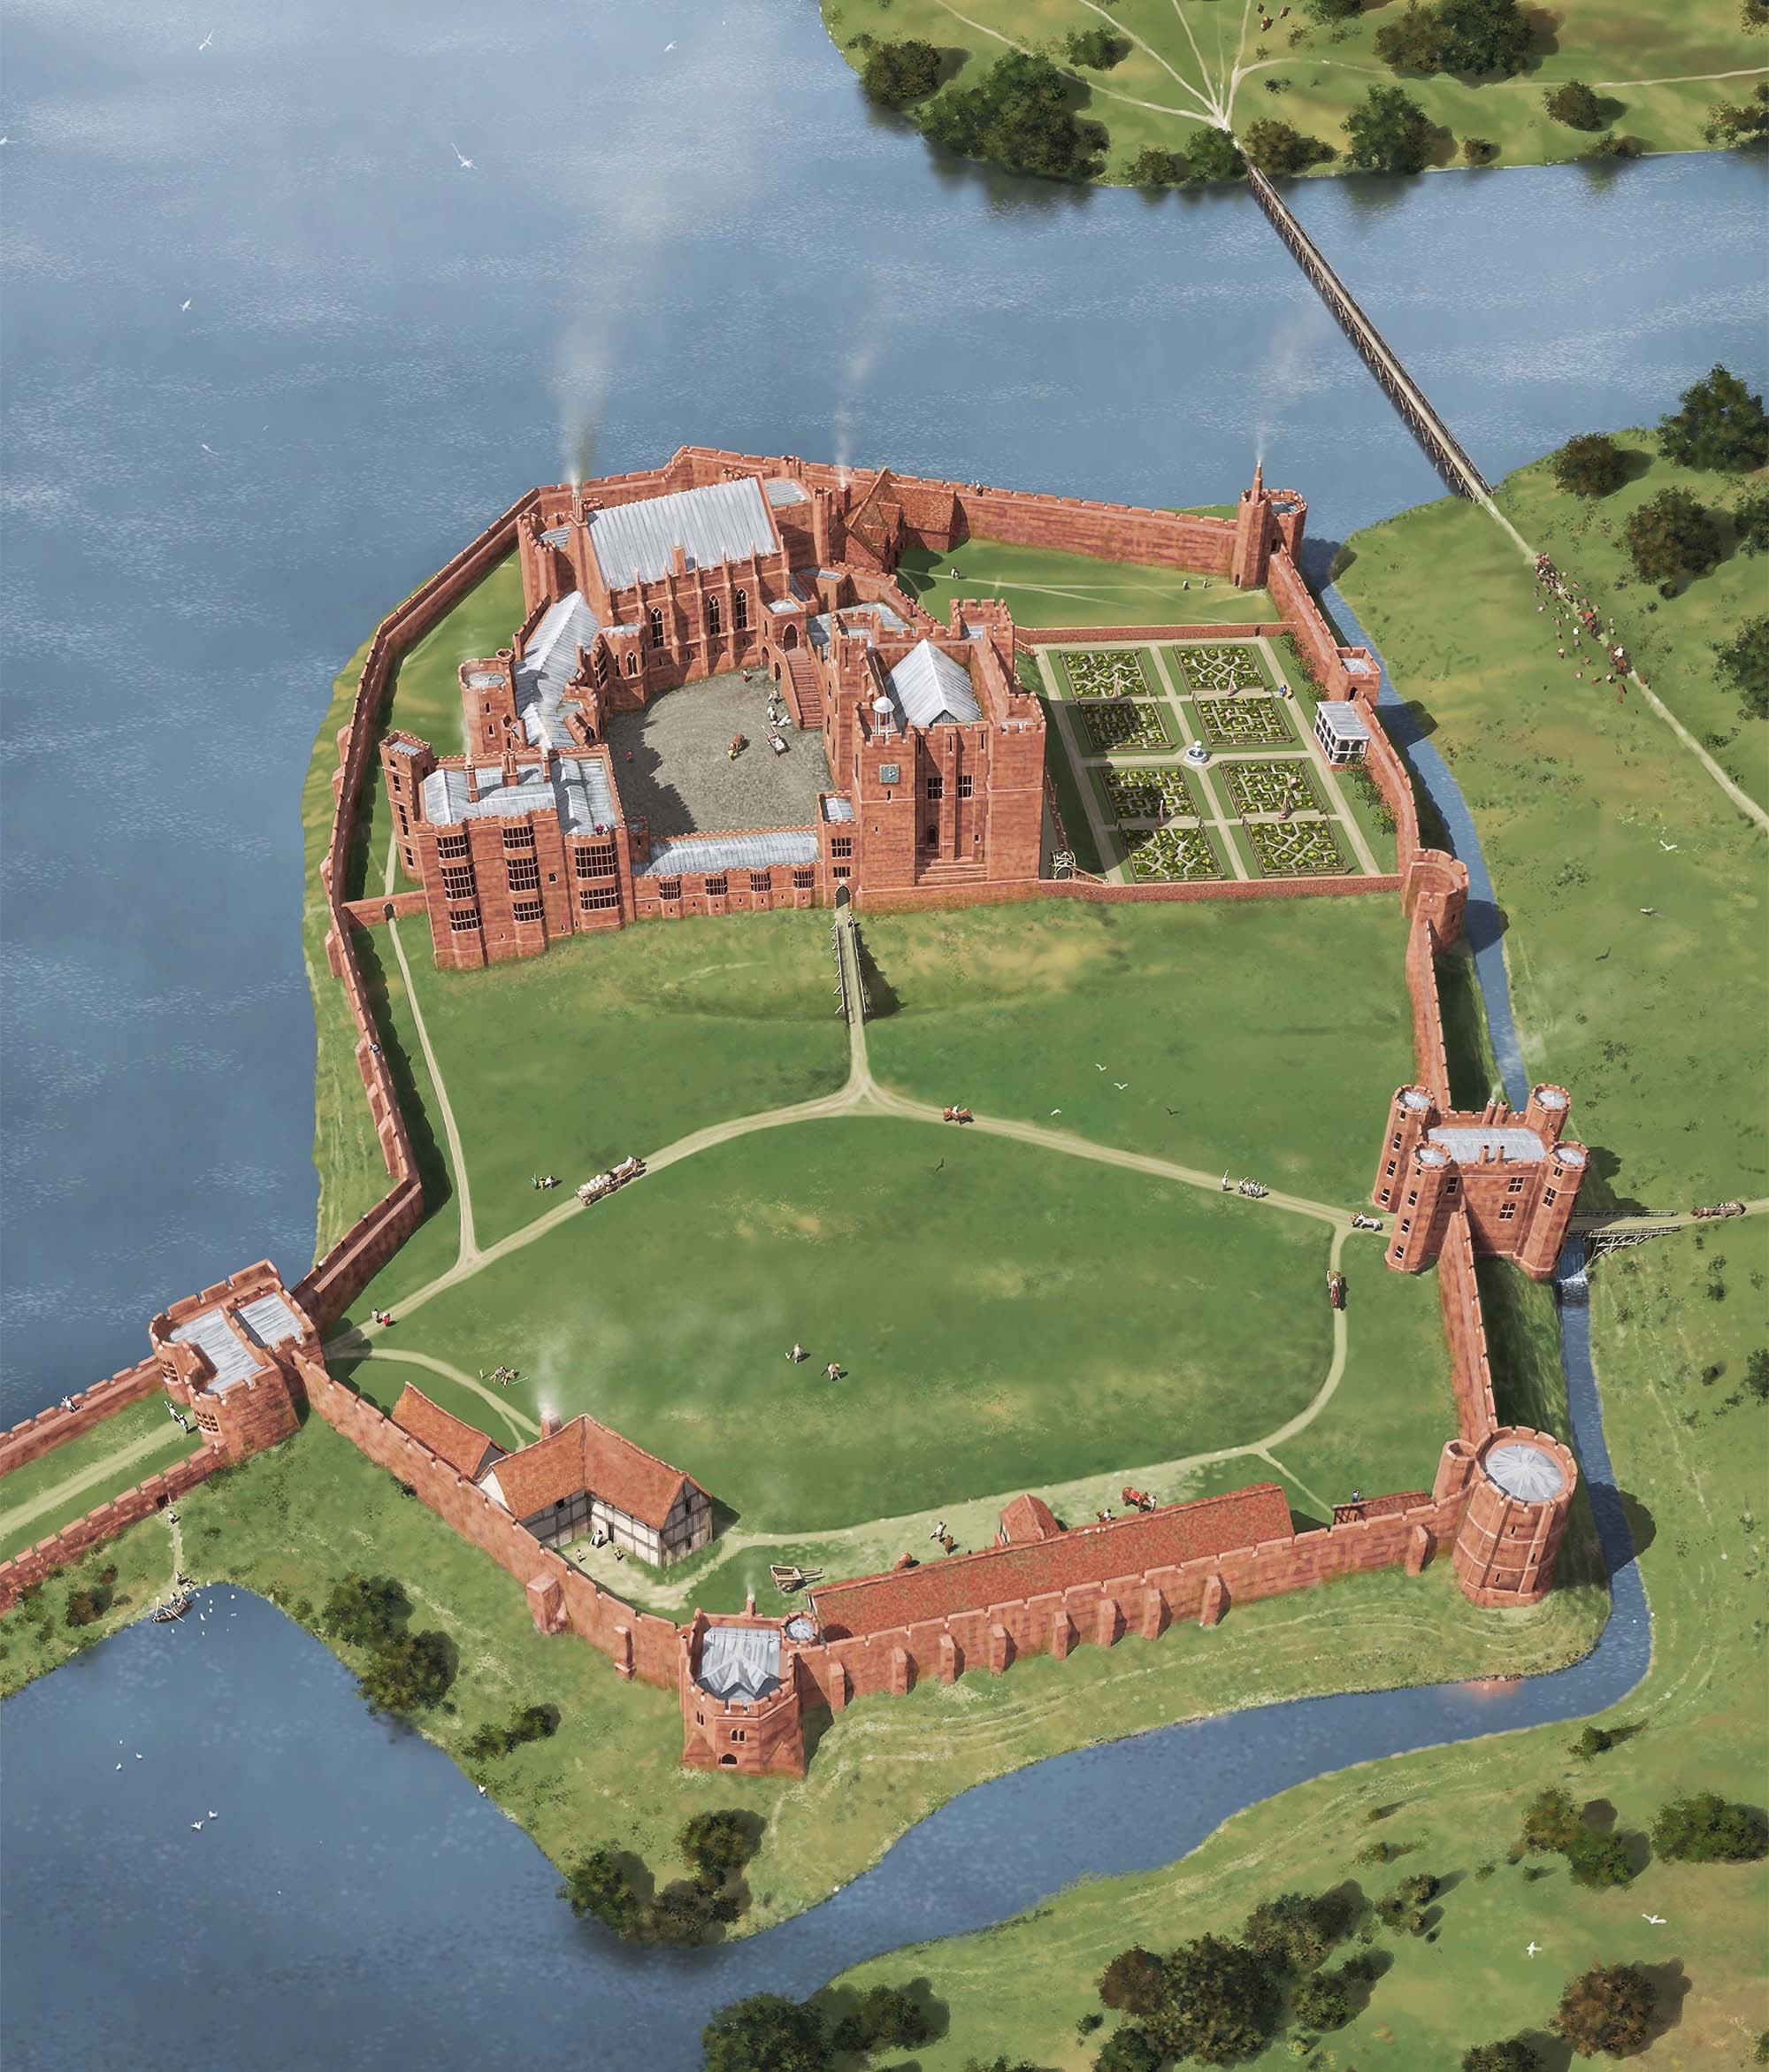 A reconstruction of Kenilworth as it may have appeared in 1575, after the Earl of Leicester’s works